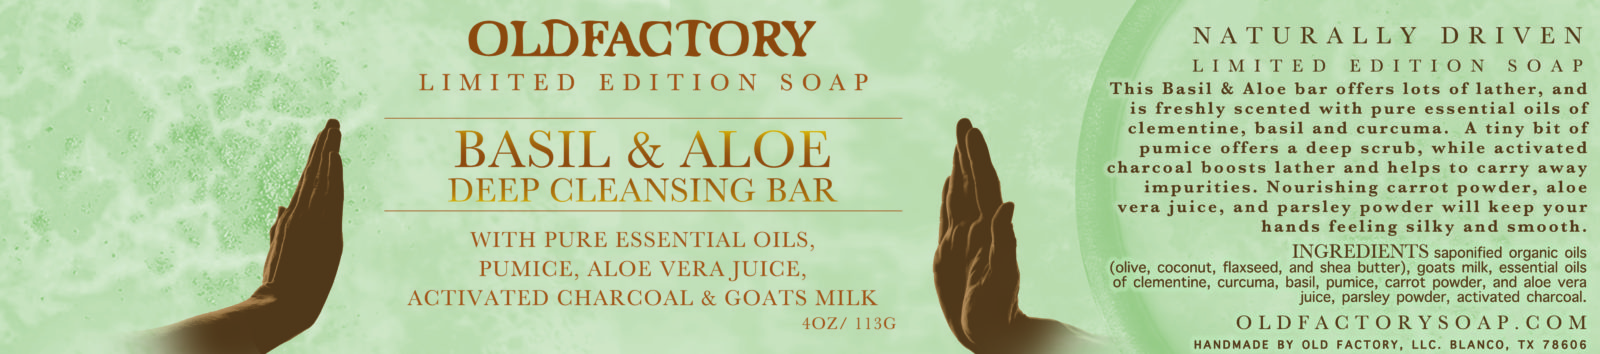 Basil and Aloe Limited Edition Soap by Old Factory Soap Blanco Texas